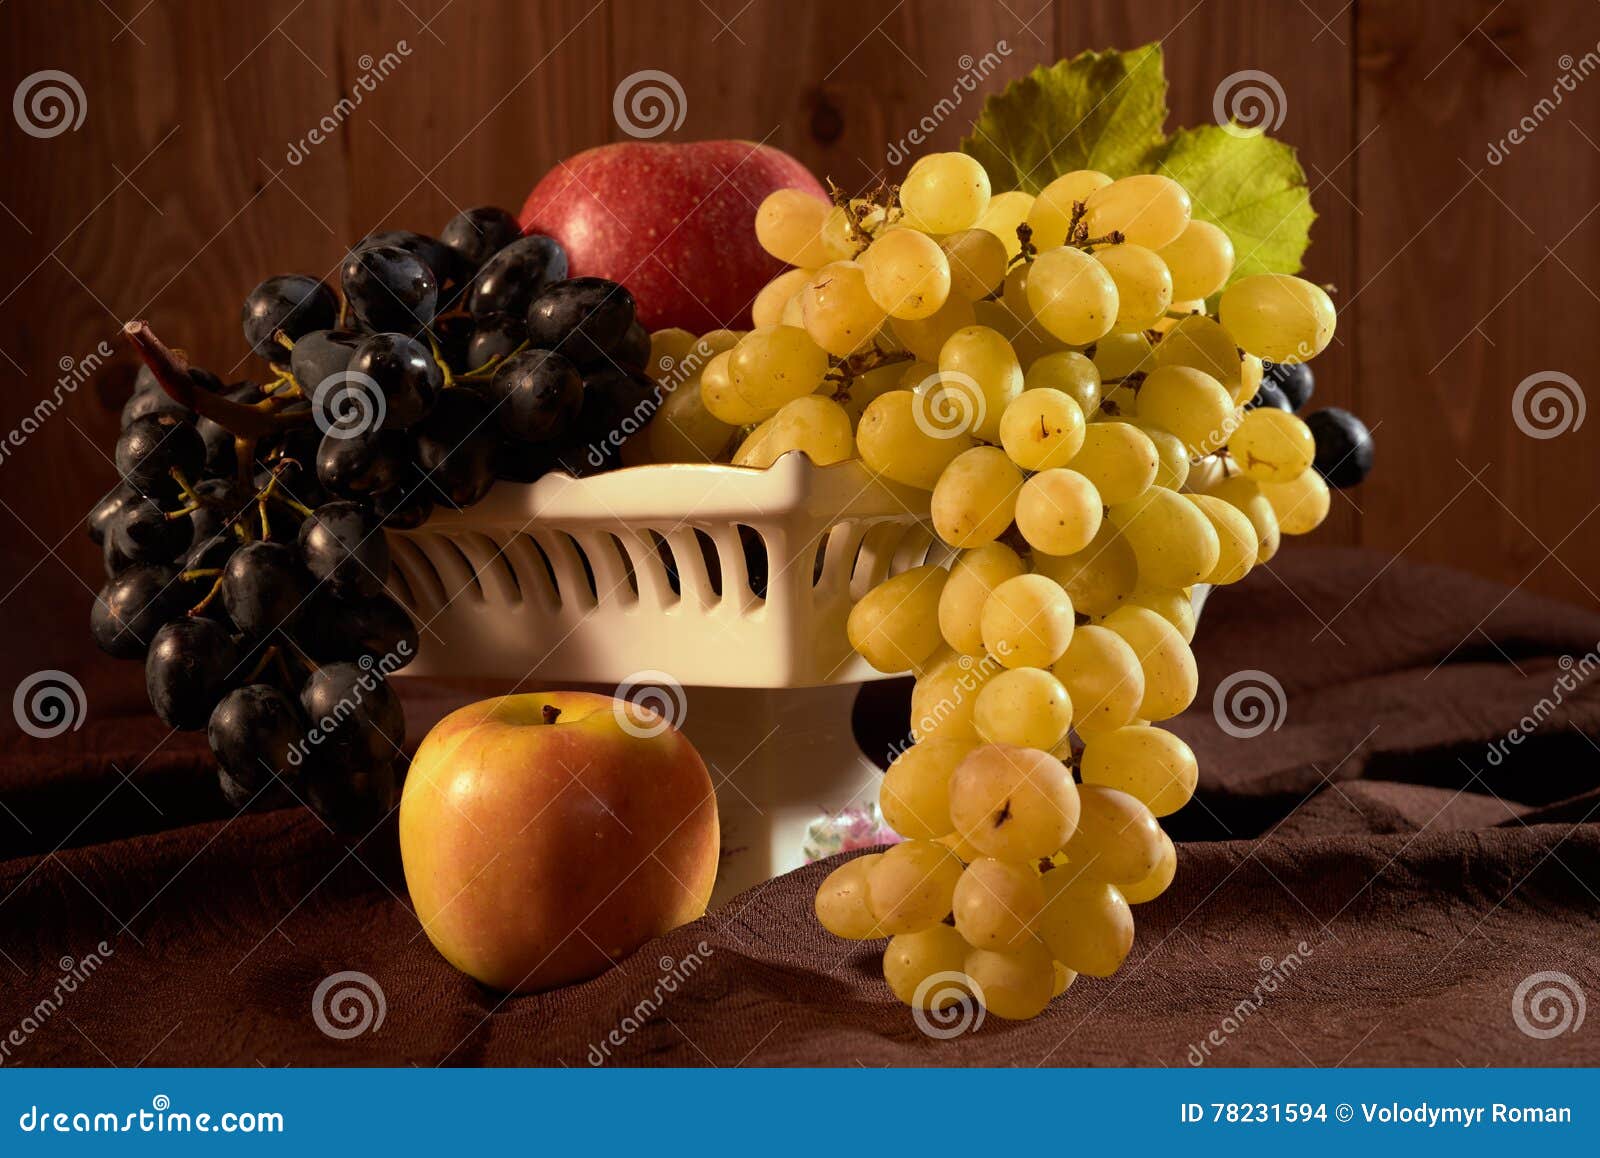 Fruit bowl on the table stock photo. Image of food, beautiful - 78231594